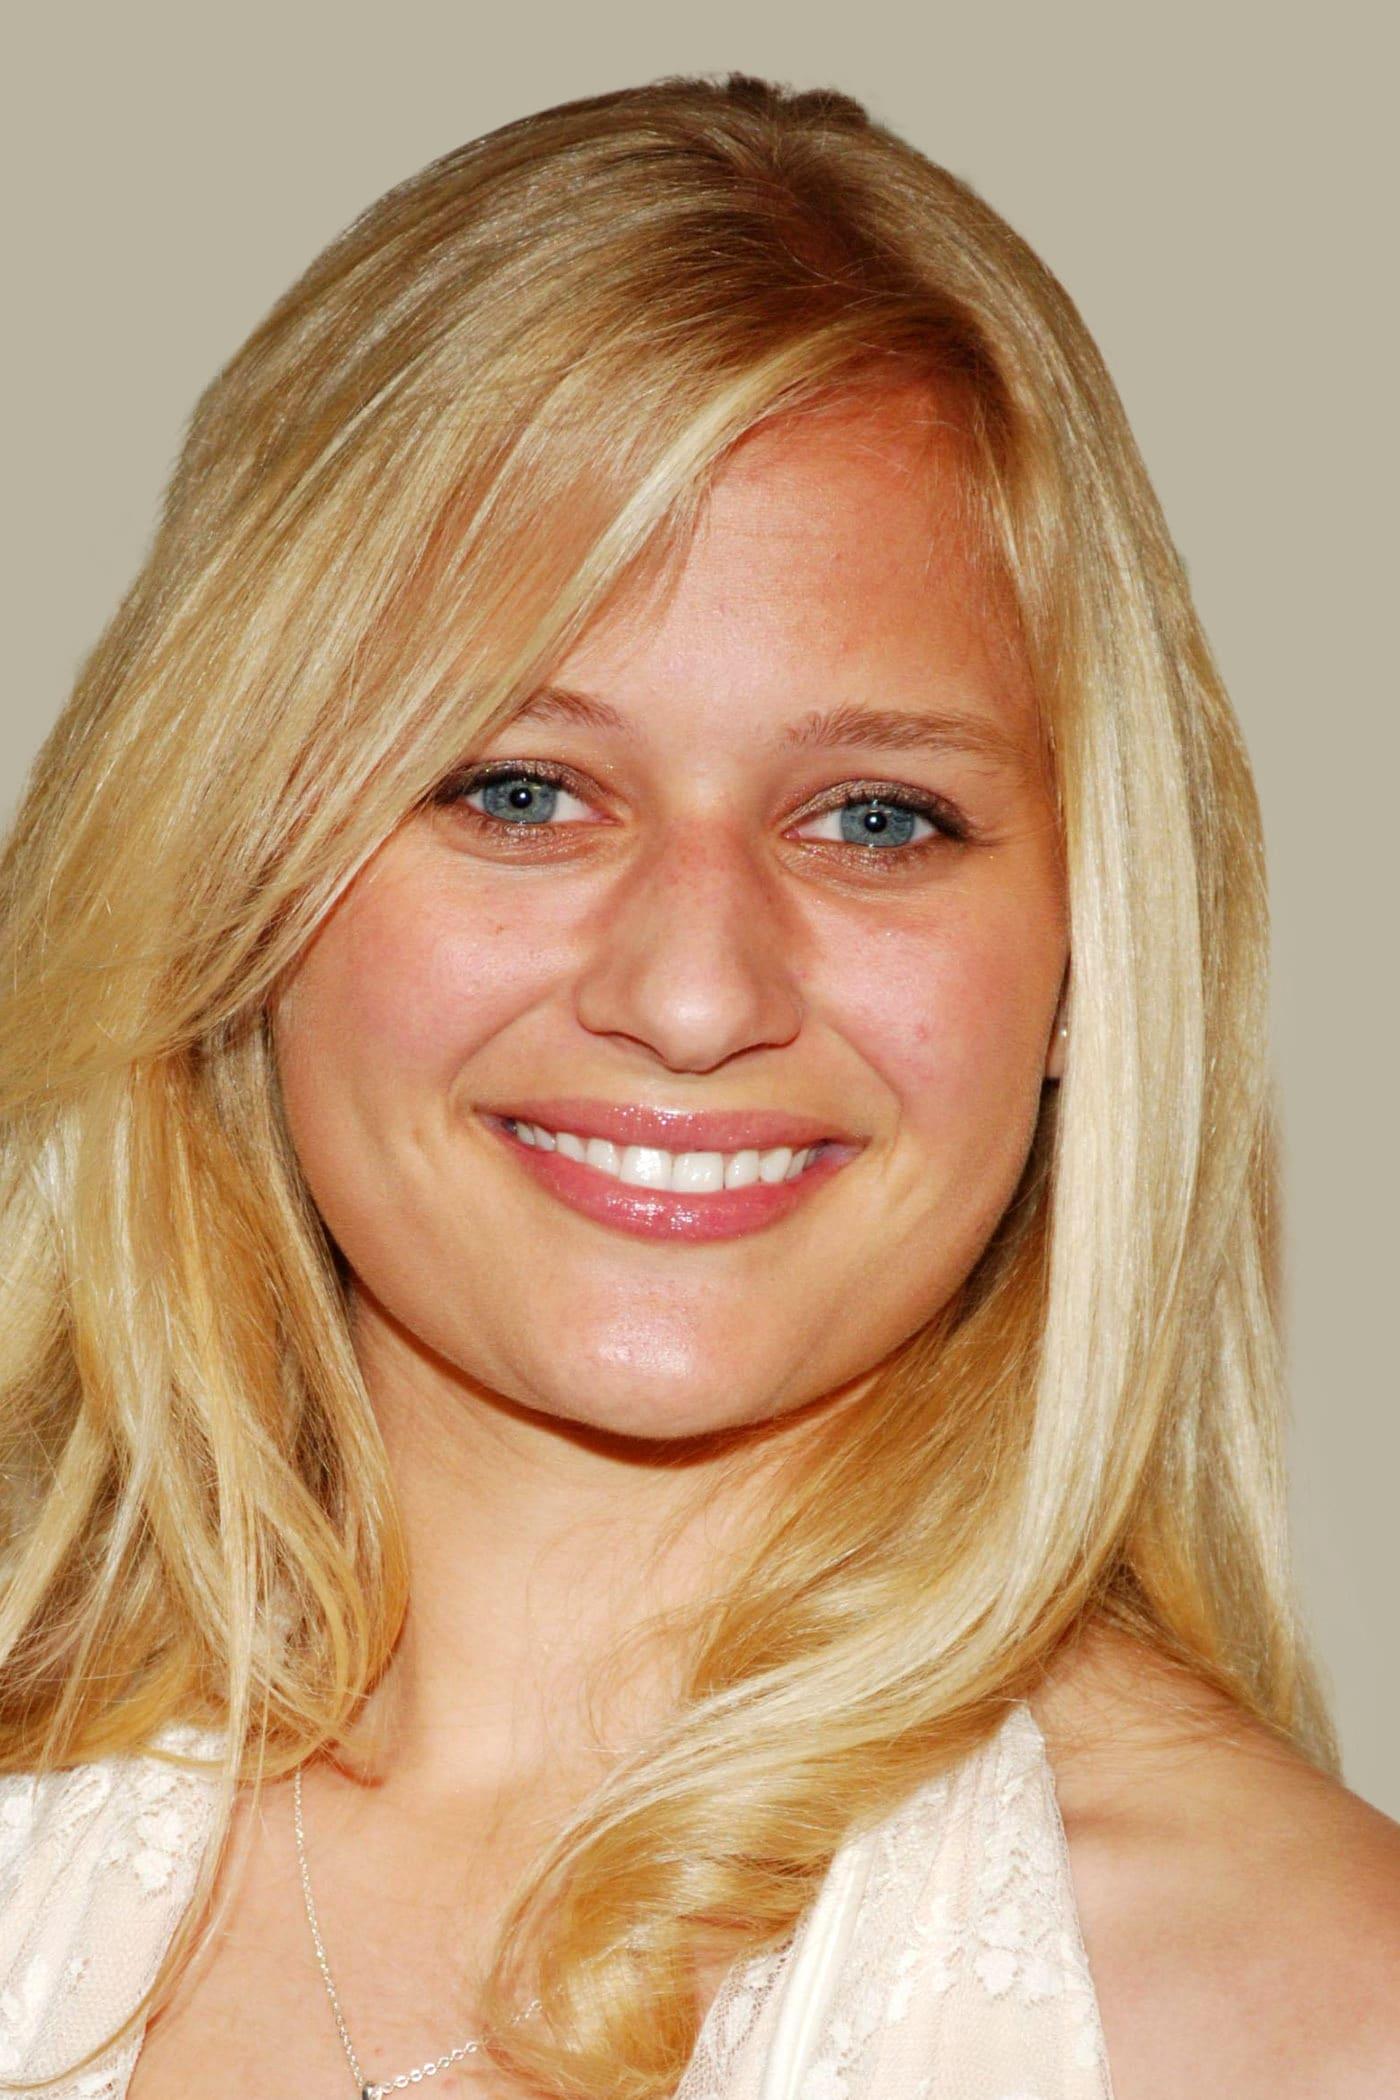 Carly Schroeder | Carly